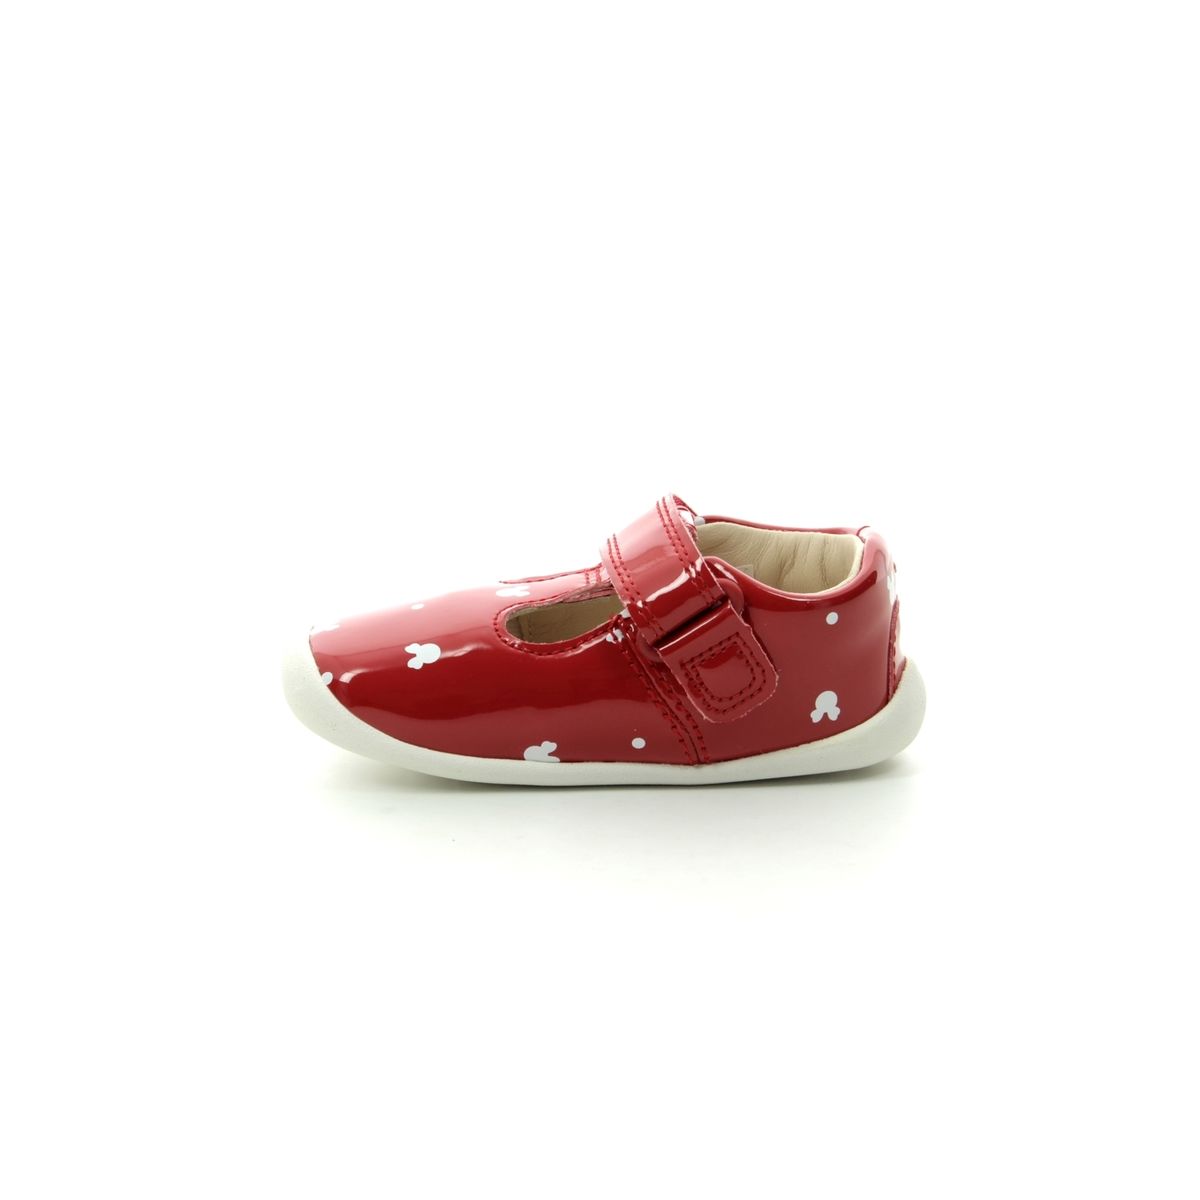 clarks red patent shoes